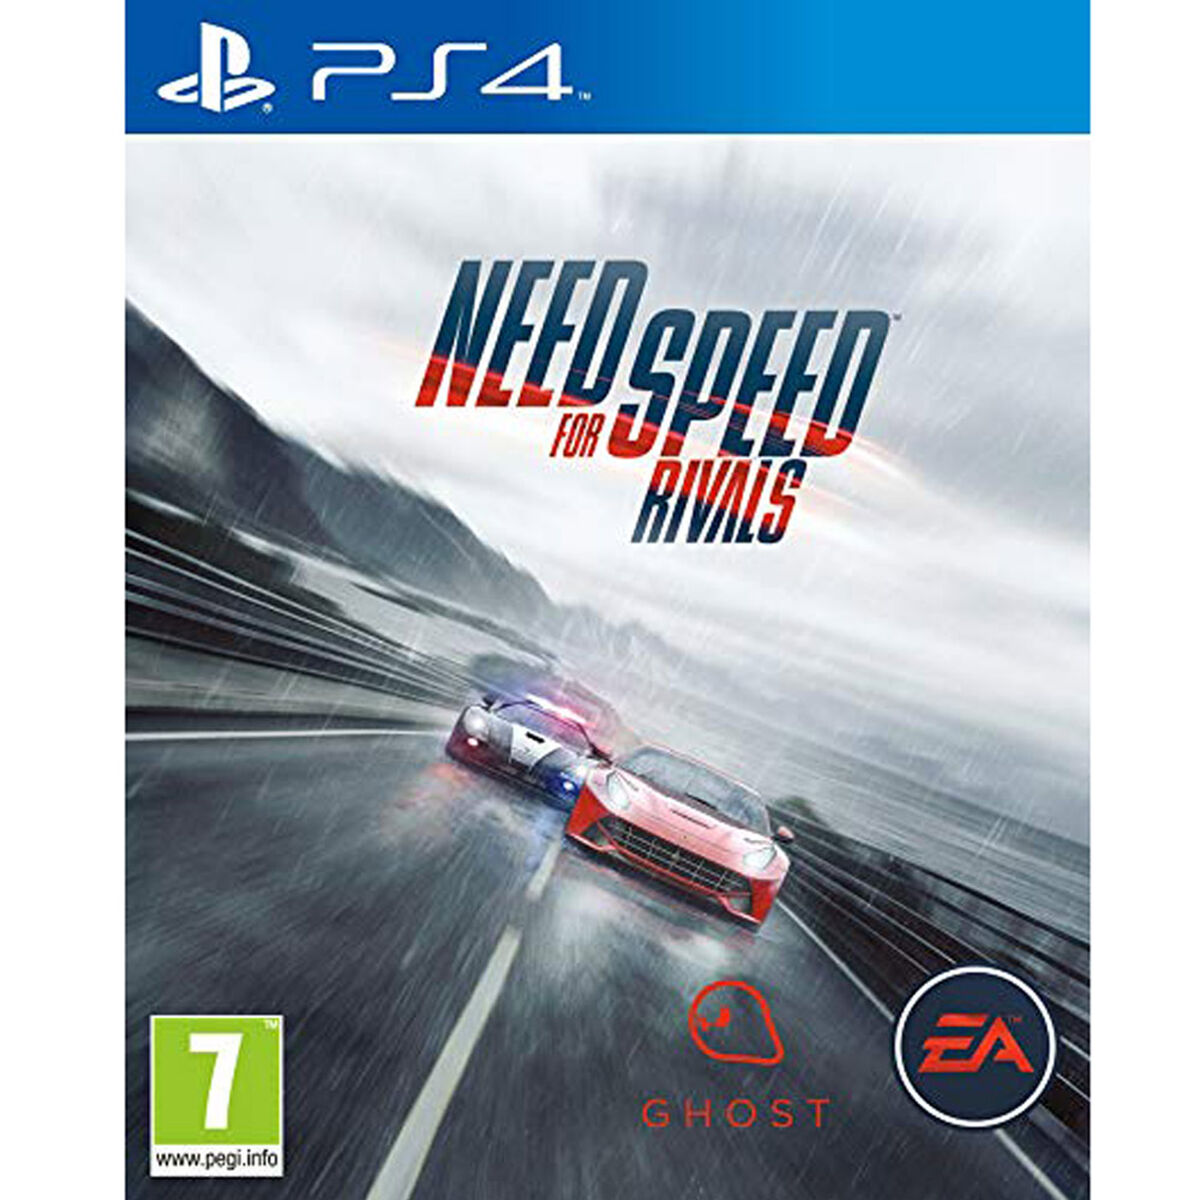 Juego PS4 EA Need for Speed Rivals